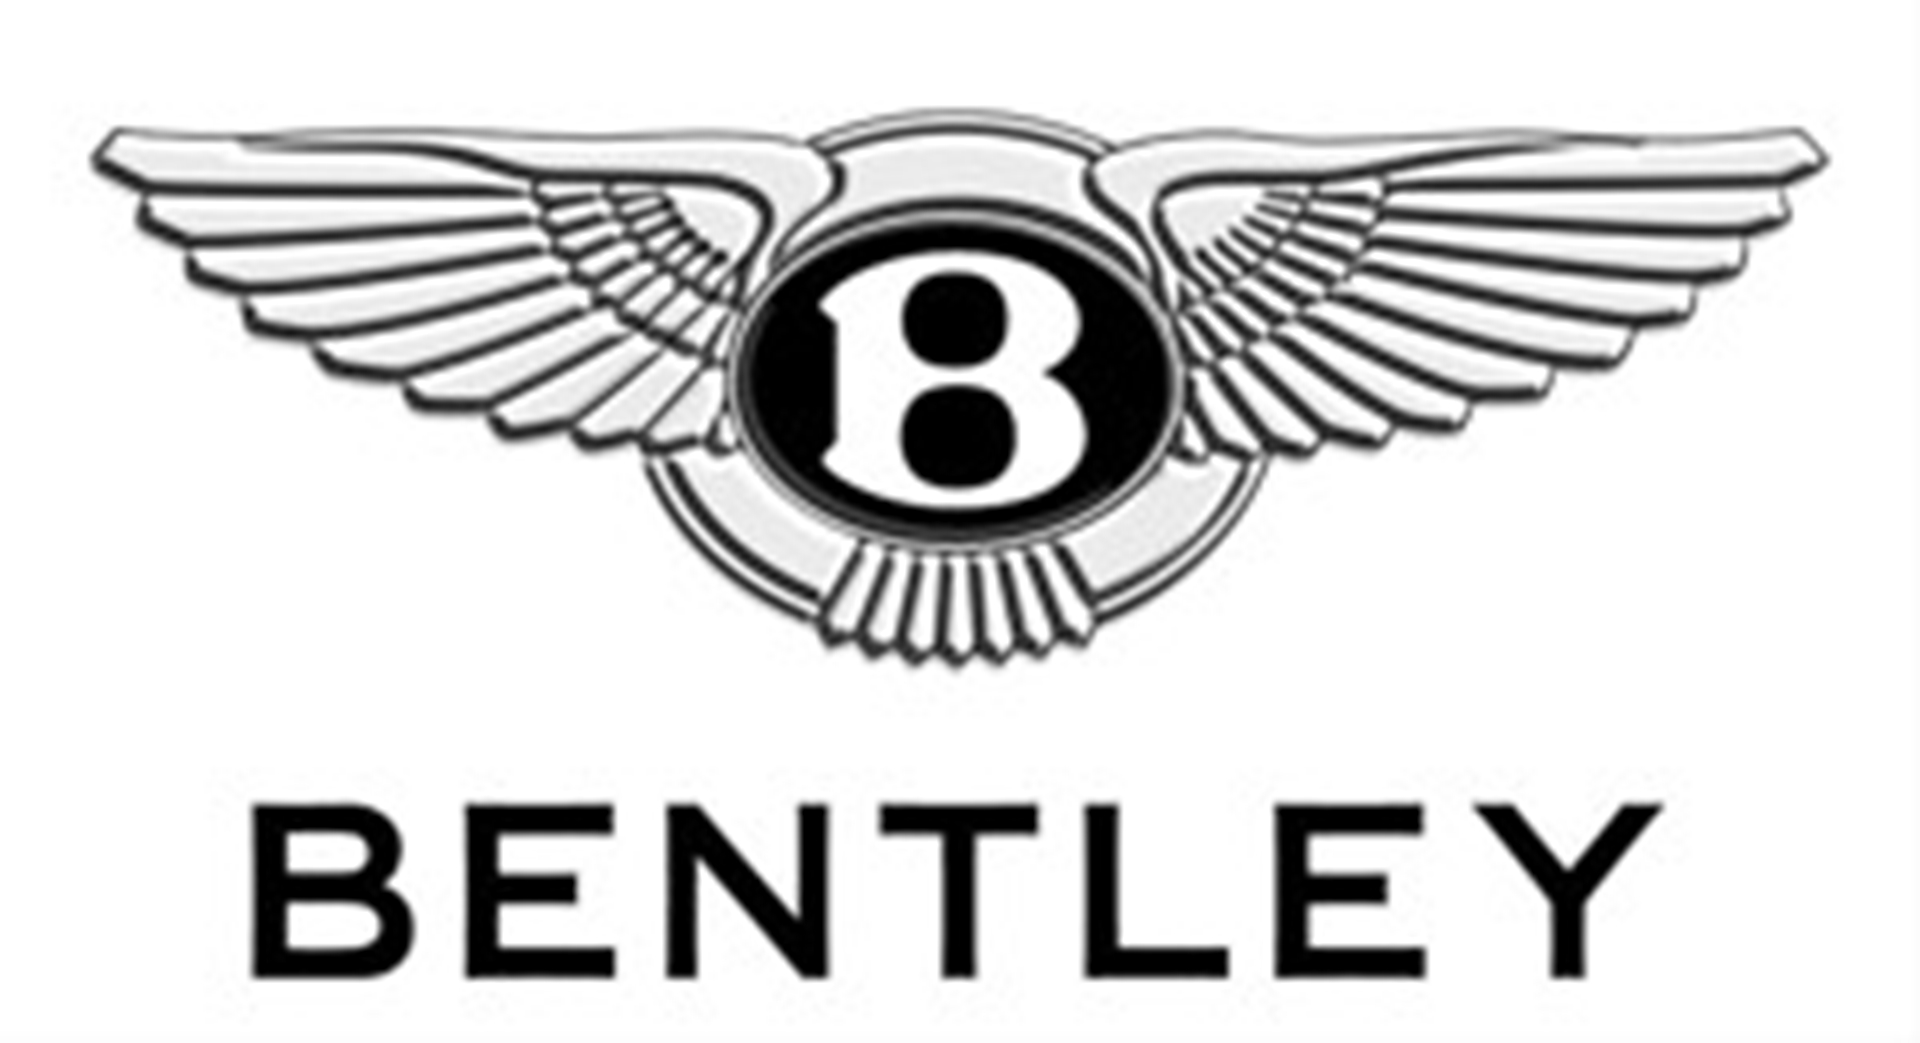 A POTENT PRESENCE – OPENING OF BENTLEY LYON